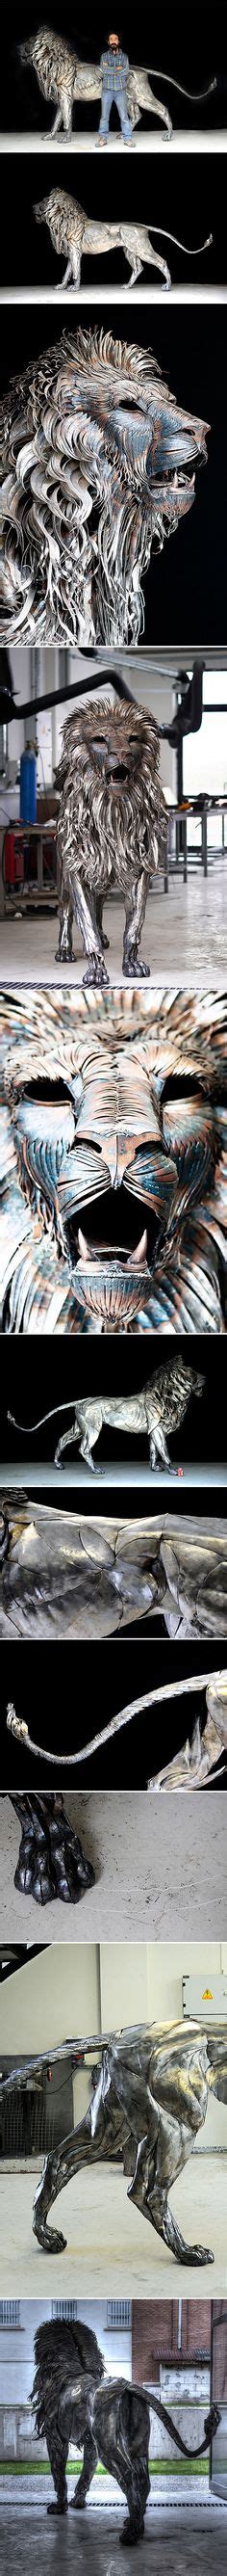 This Amazing 550 Pound Lion Was Made From 4000 Pieces Of Metal Art